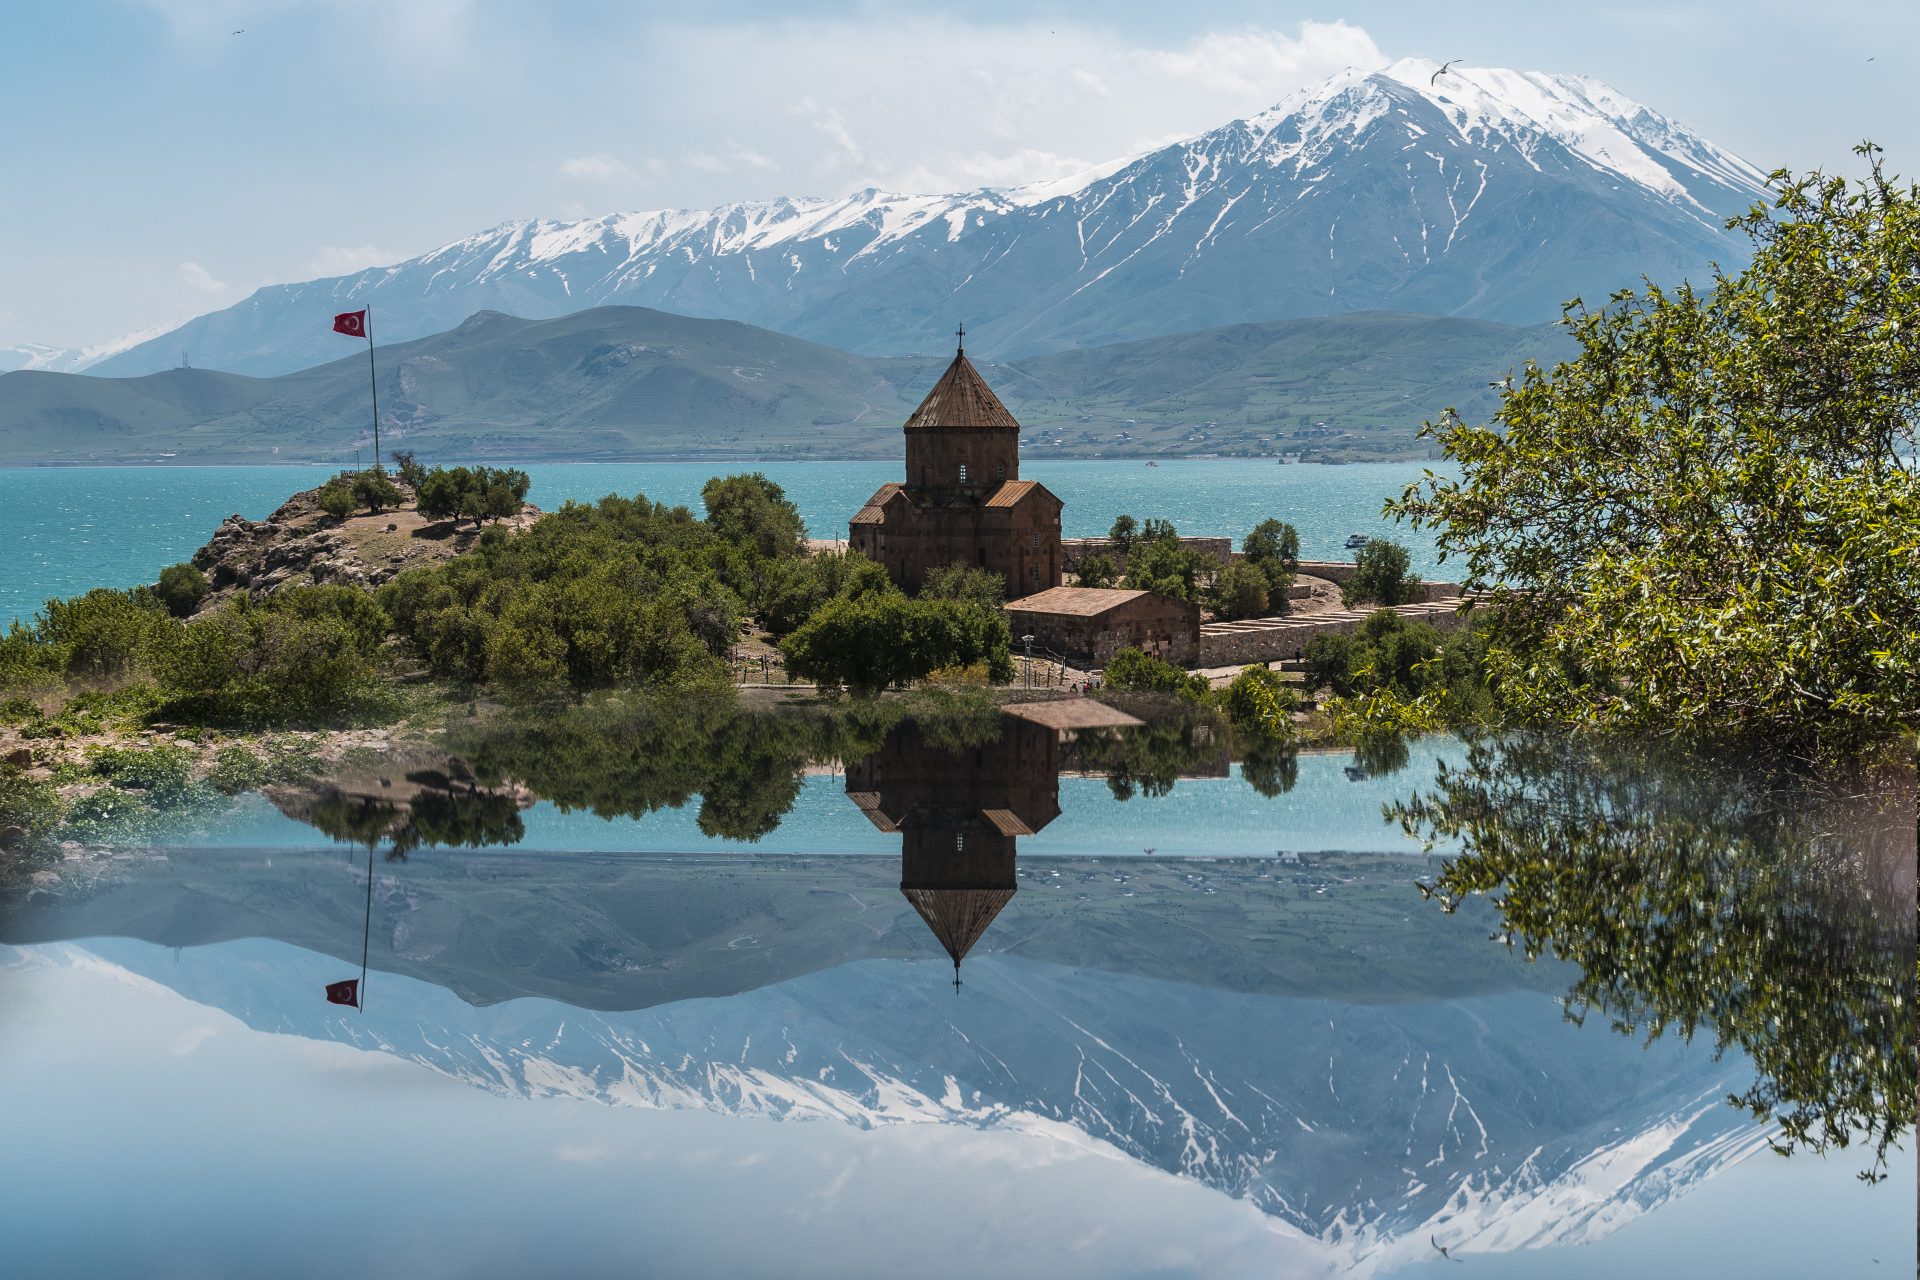 <p>This island in eastern Turkey is a historical and culturally rich place for its natural beauty and its Armenian Cathedral. Surp Khach (the Cathedral of the Holy Cross) was built in the 10th century by Armenian King Gagik I. You can see intricate stone carvings there, especially in its exterior reliefs with biblical scenes, animals, and geometric motifs. The cathedral is one of the finest examples of Armenian medieval architecture and a masterpiece of medieval art.</p>